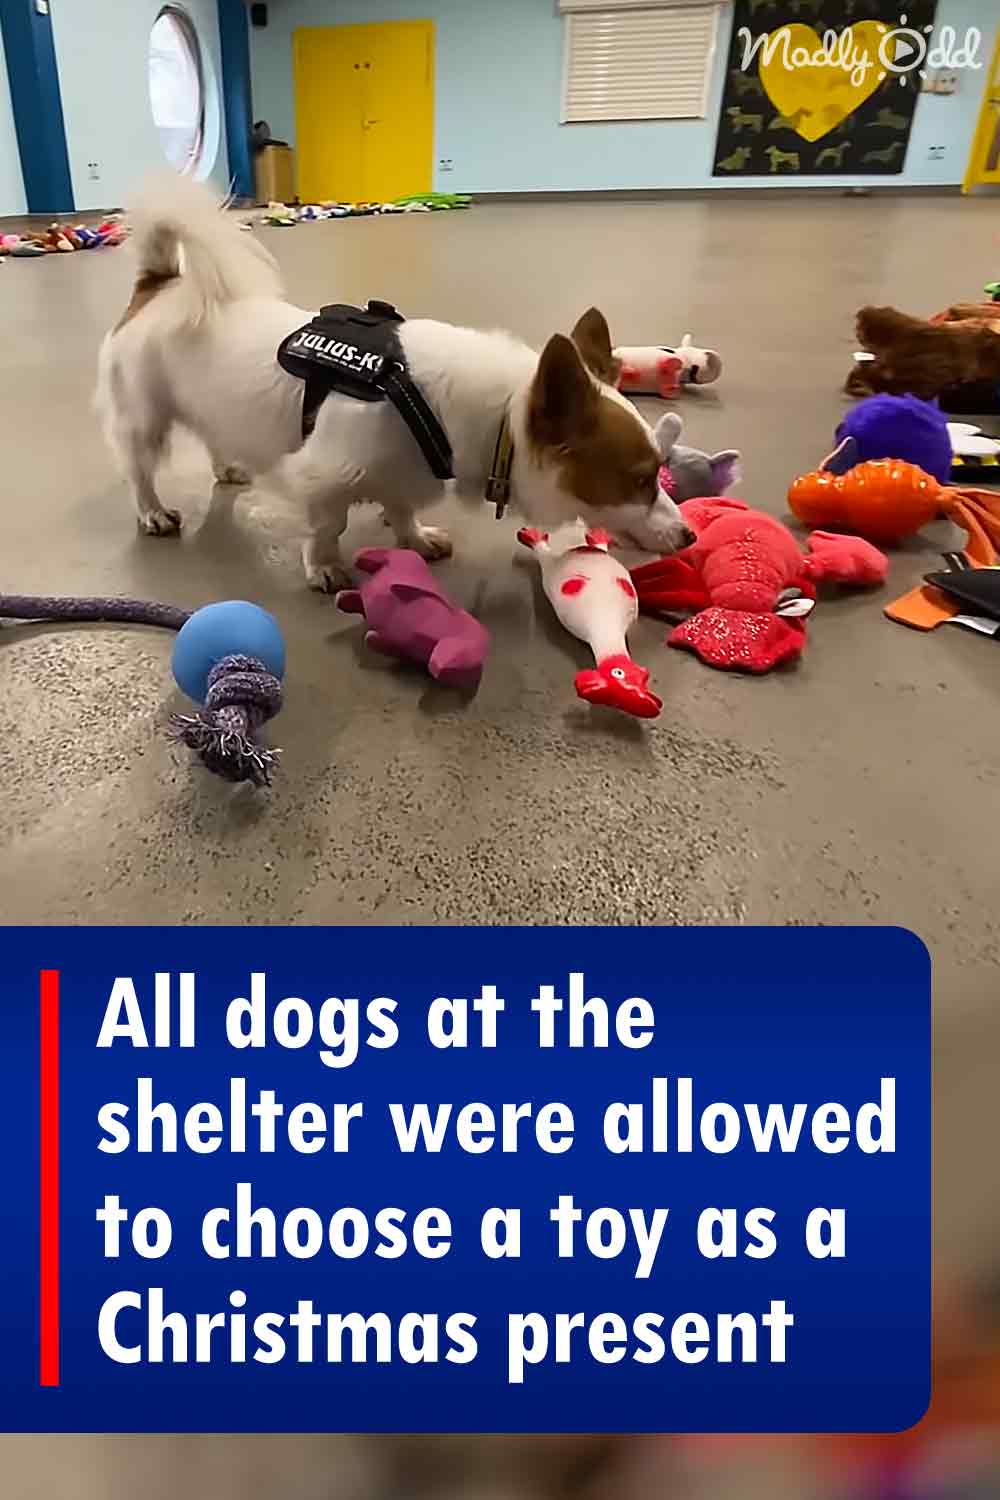 All dogs at the shelter were allowed to choose a toy as a Christmas present